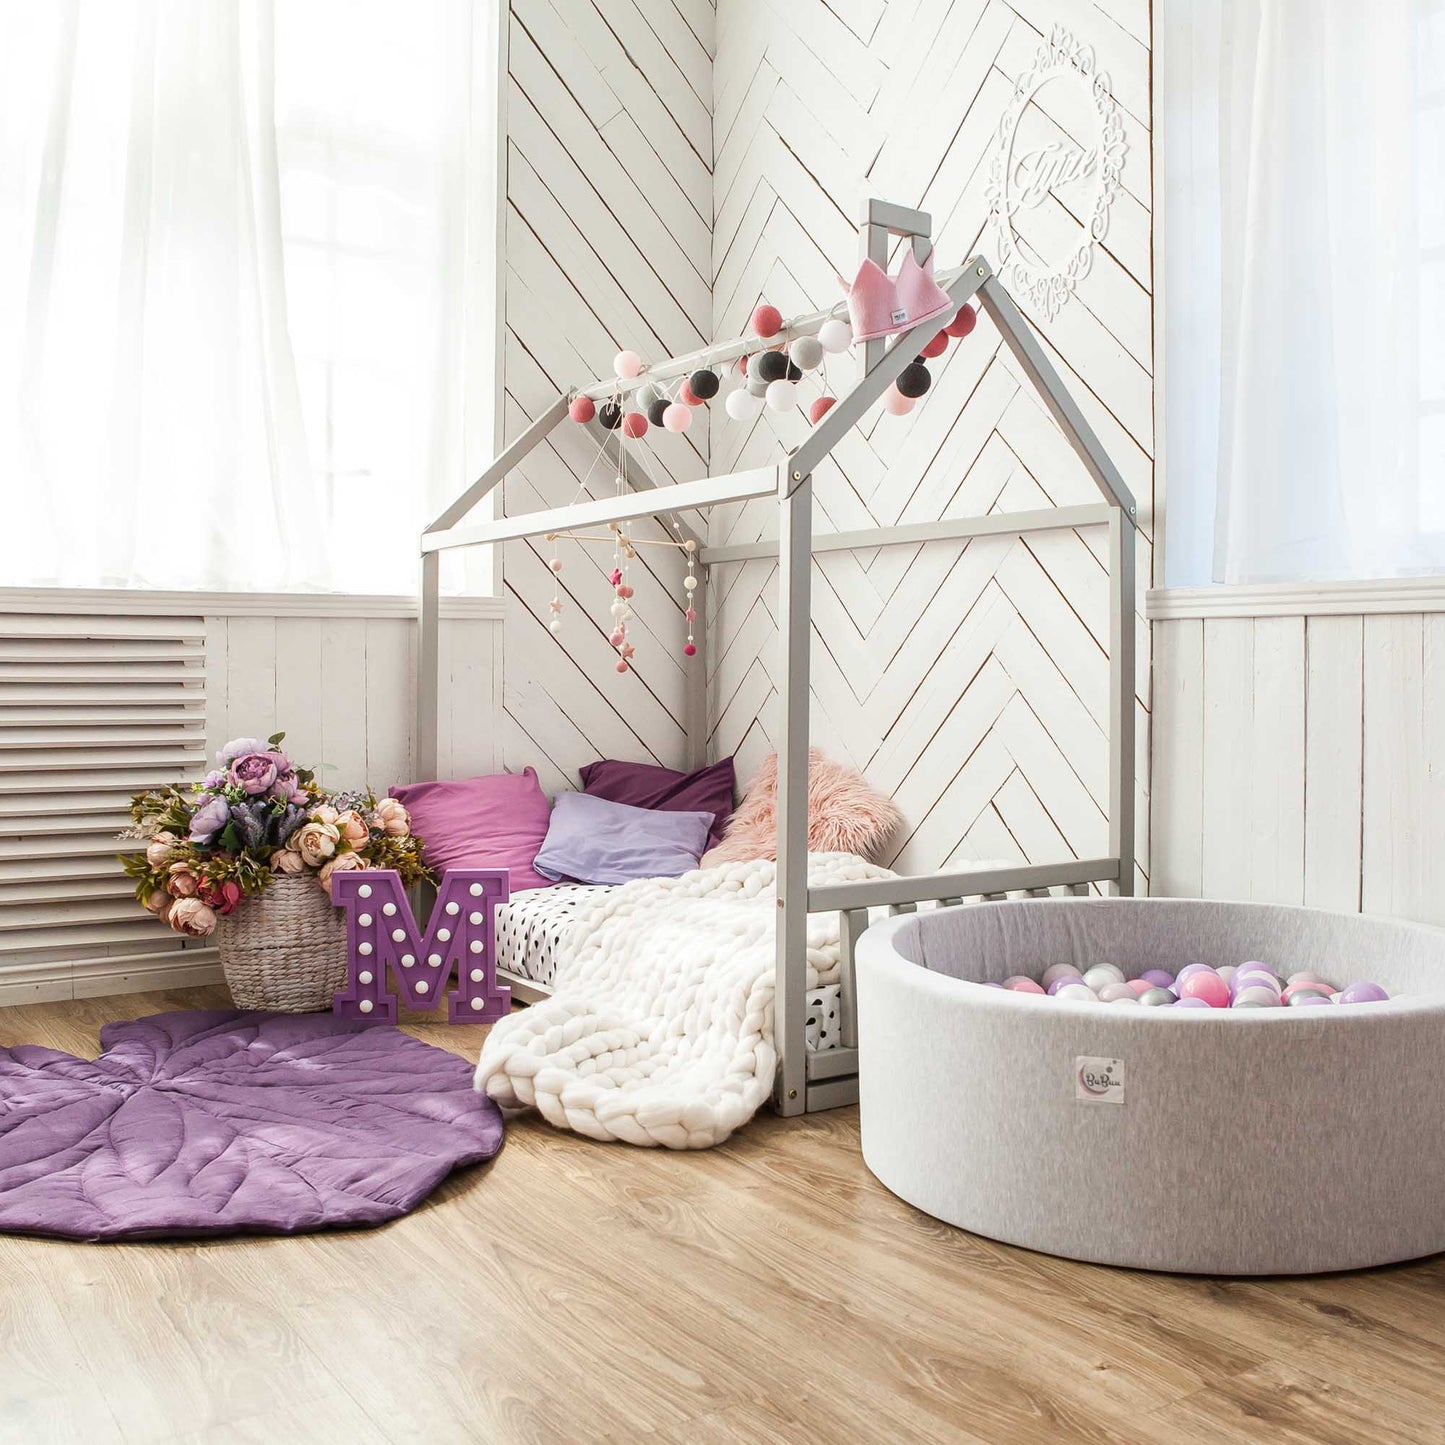 A cozy sleep haven, designed with the Montessori approach and featuring a Sweet Home From Wood toddler house bed with a headboard and footboard and a playful ball pit.